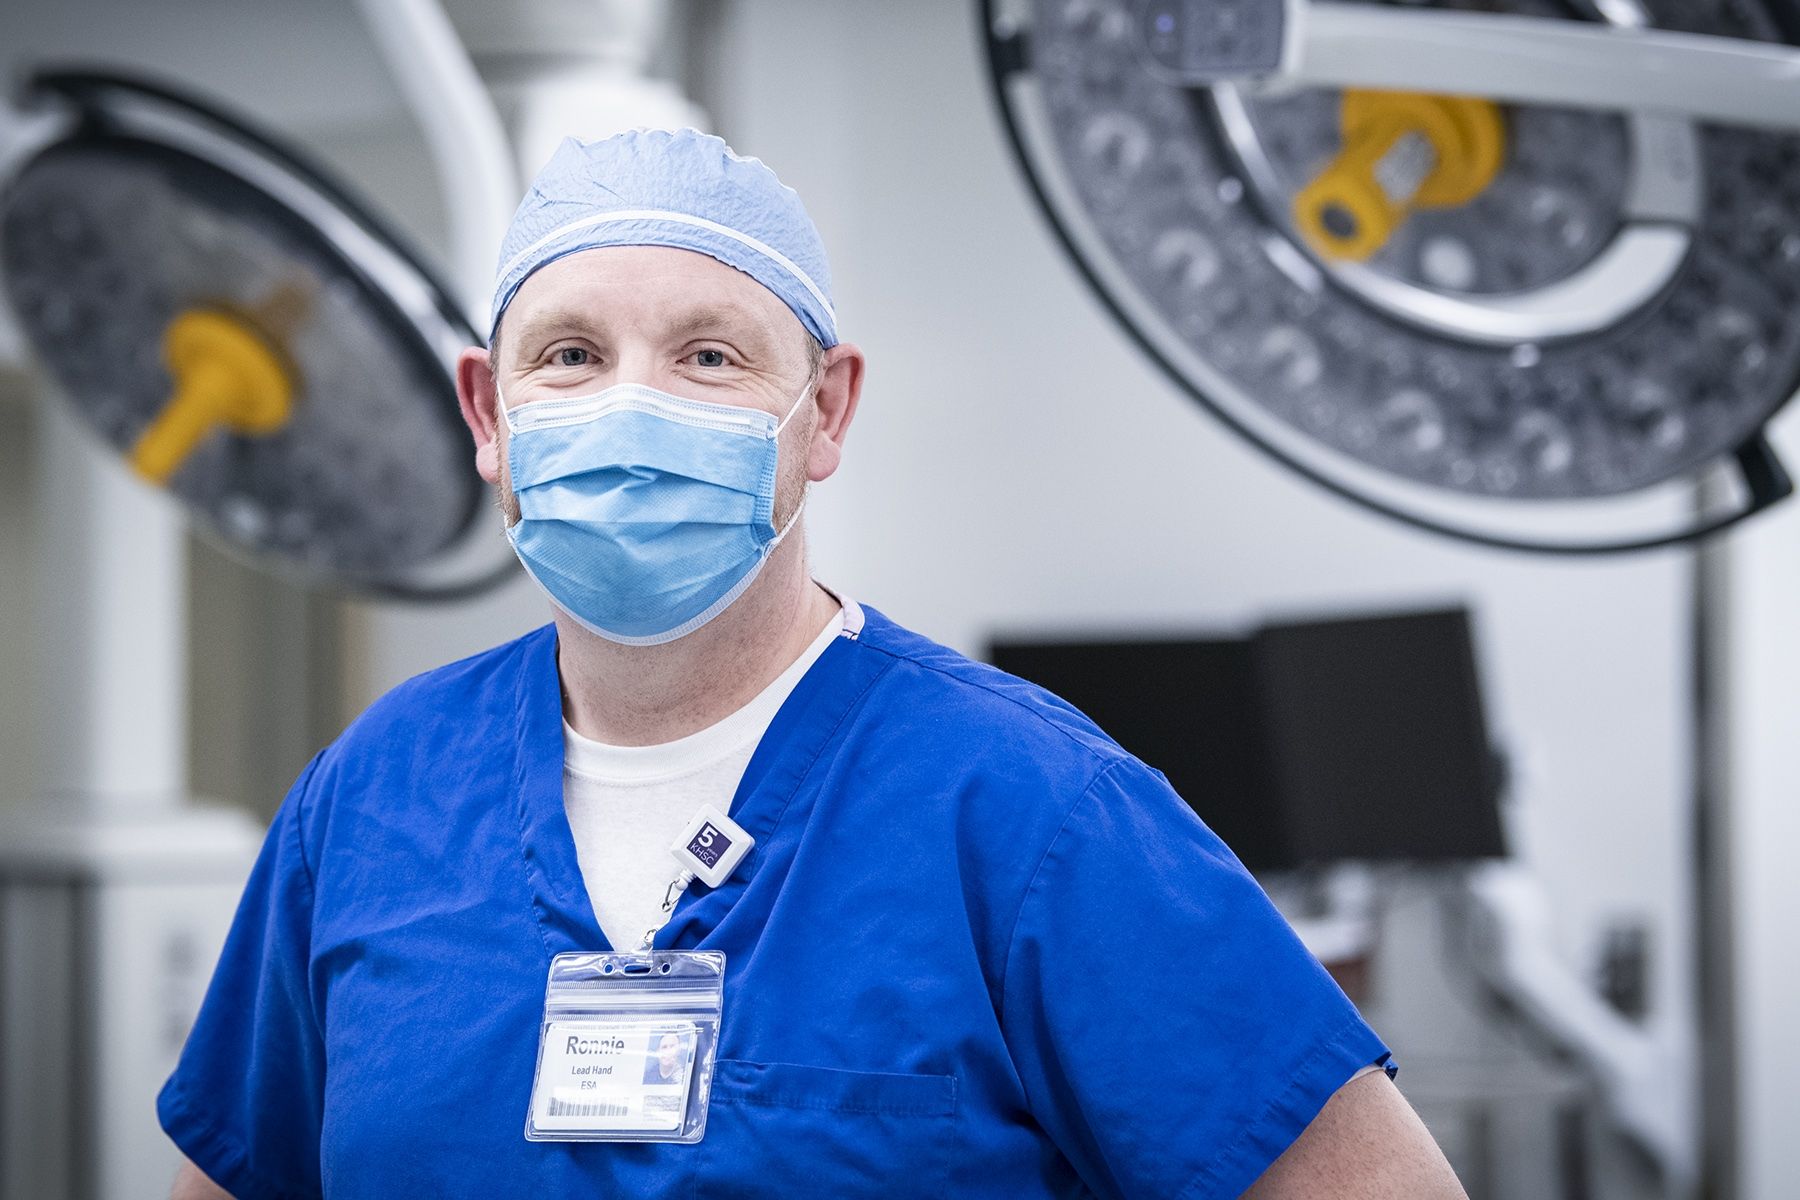 Ronnie Lott is pictured standing inside one of the operating rooms at the KGH site. He has blue eyes and is wearing blue scrubs, a scrub hat and mask. 